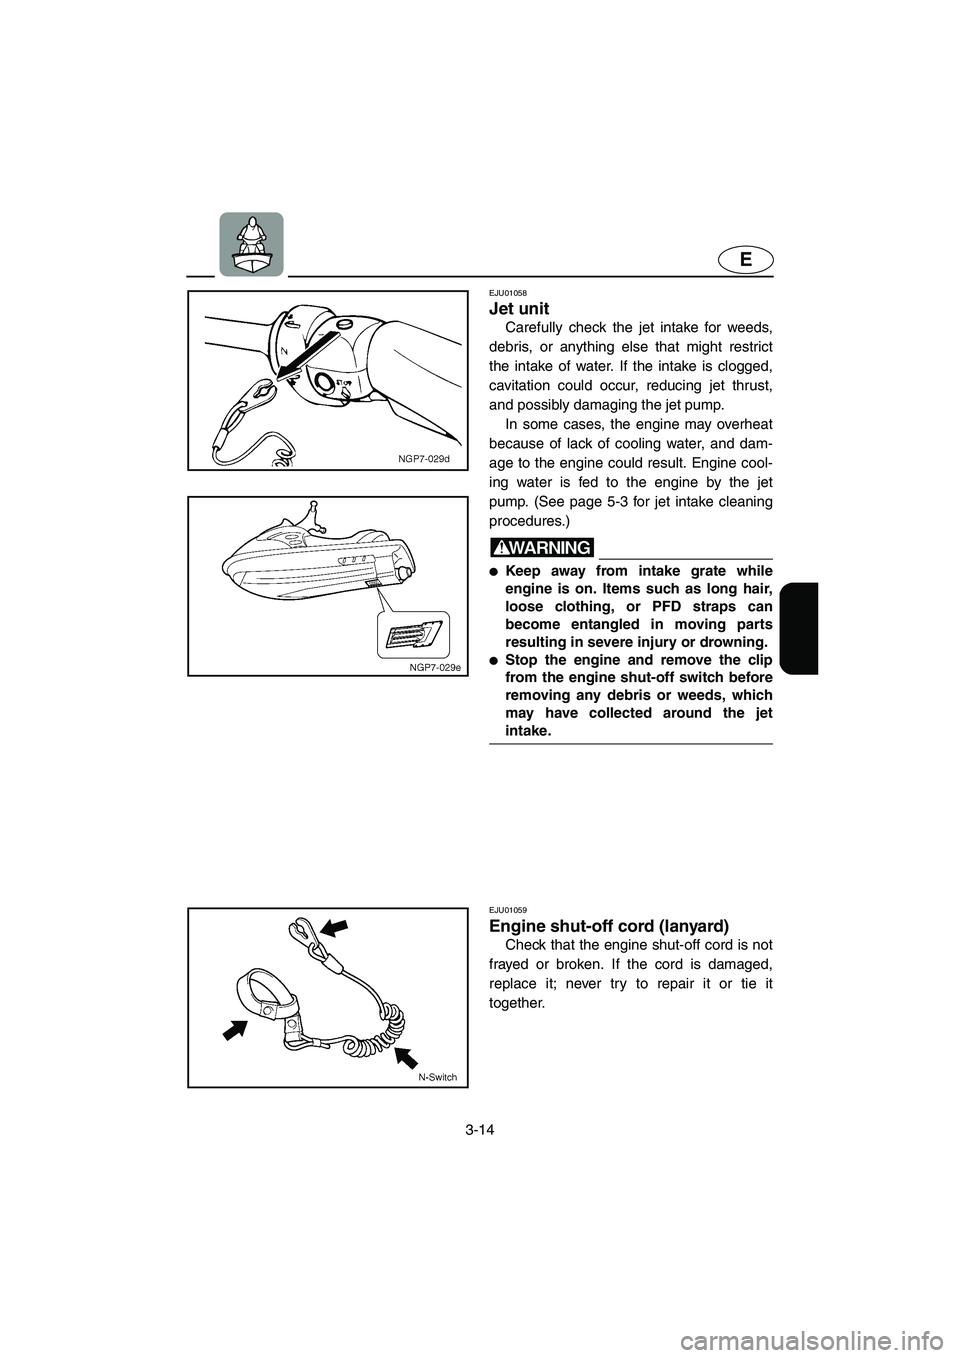 YAMAHA FX 2003  Owners Manual 3-14
E
EJU01058 
Jet unit  
Carefully check the jet intake for weeds,
debris, or anything else that might restrict
the intake of water. If the intake is clogged,
cavitation could occur, reducing jet t